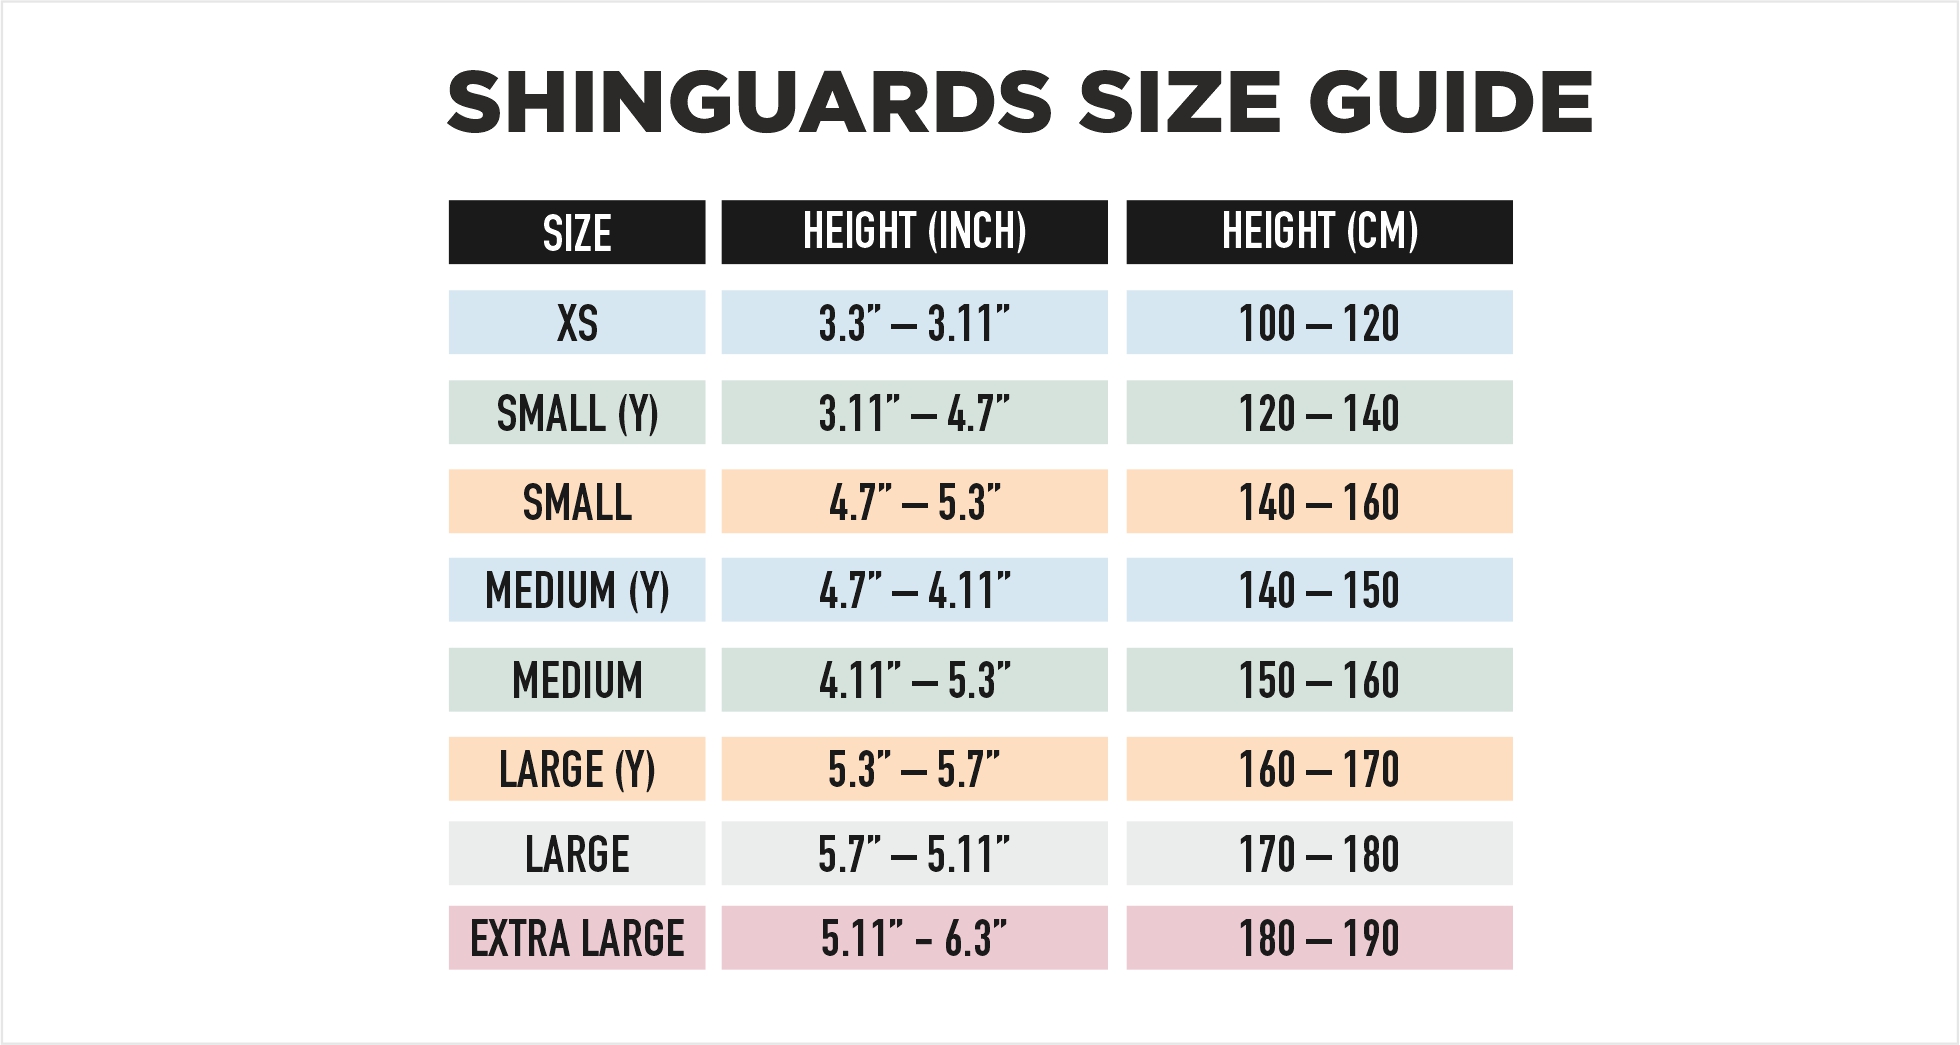 How To Measure Shinguards | A Guide 